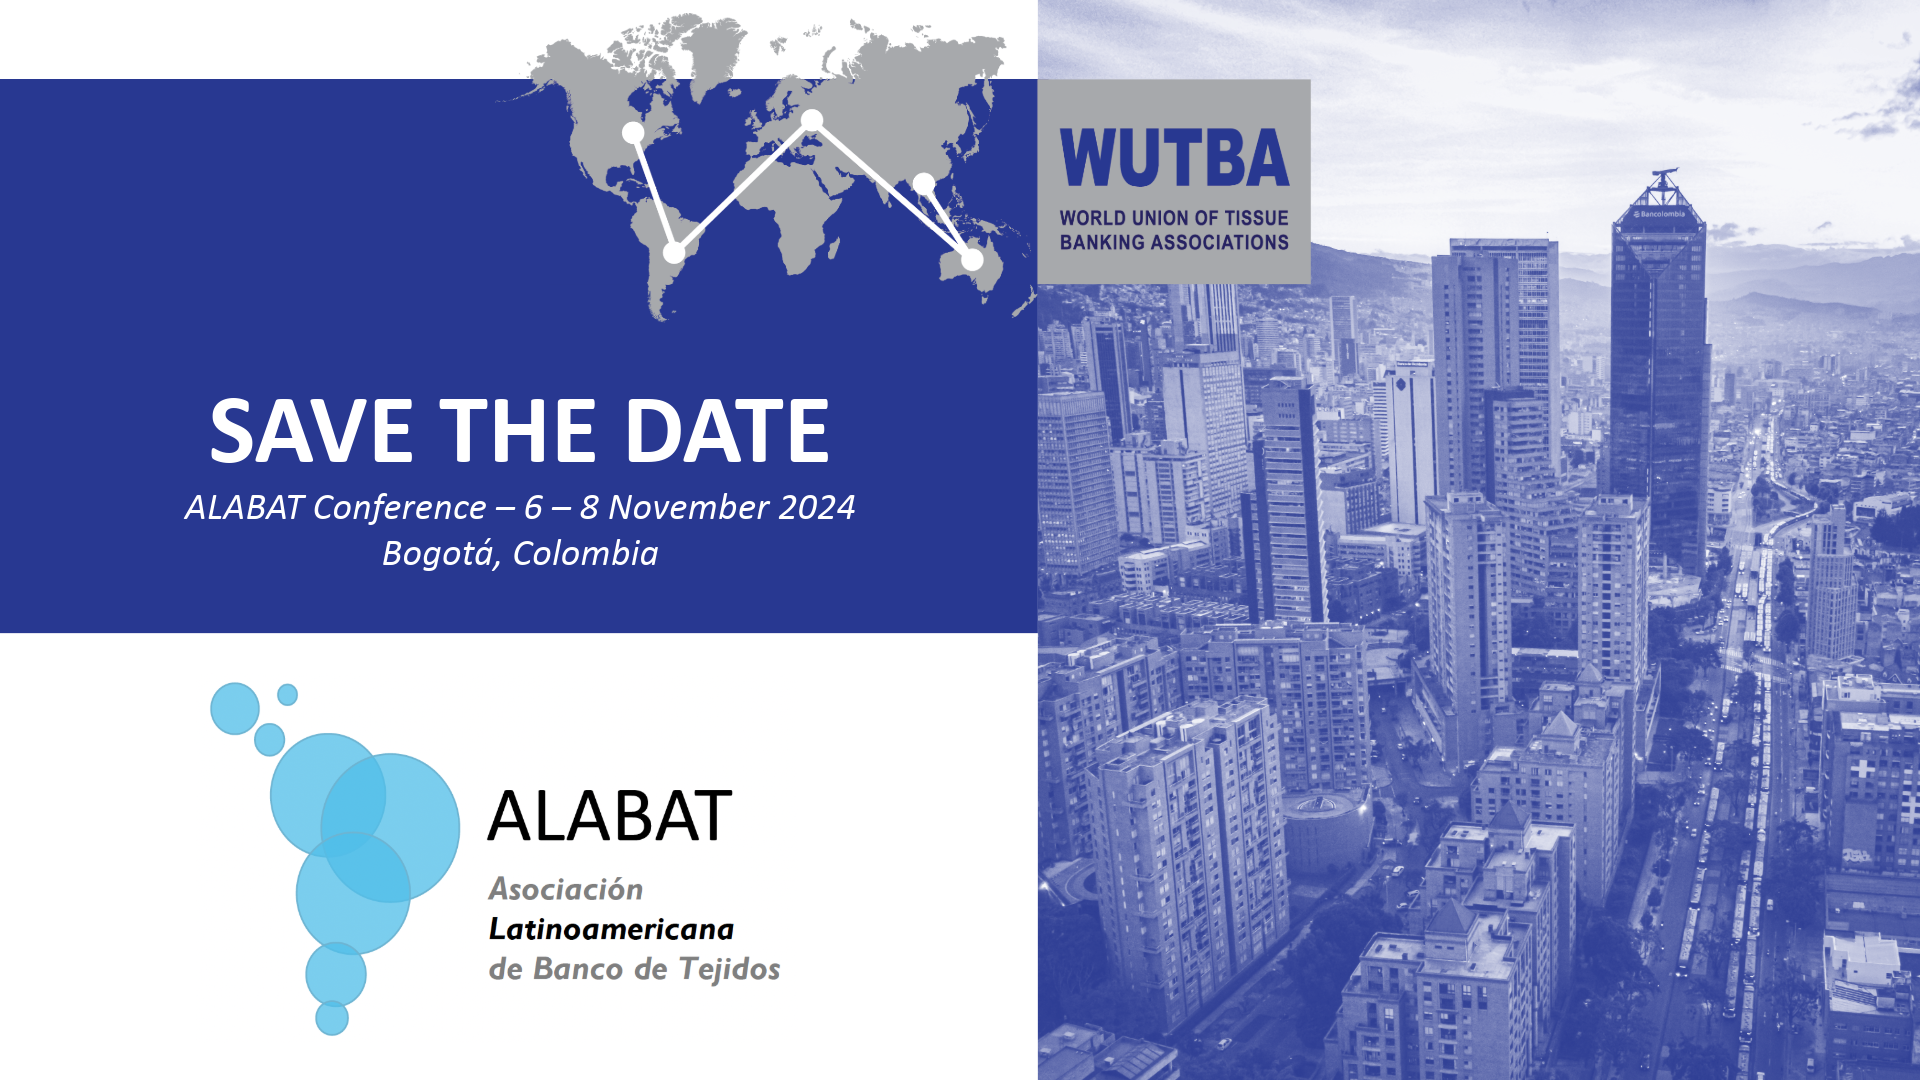 Save the Date_ALABAT_WUTBA.png